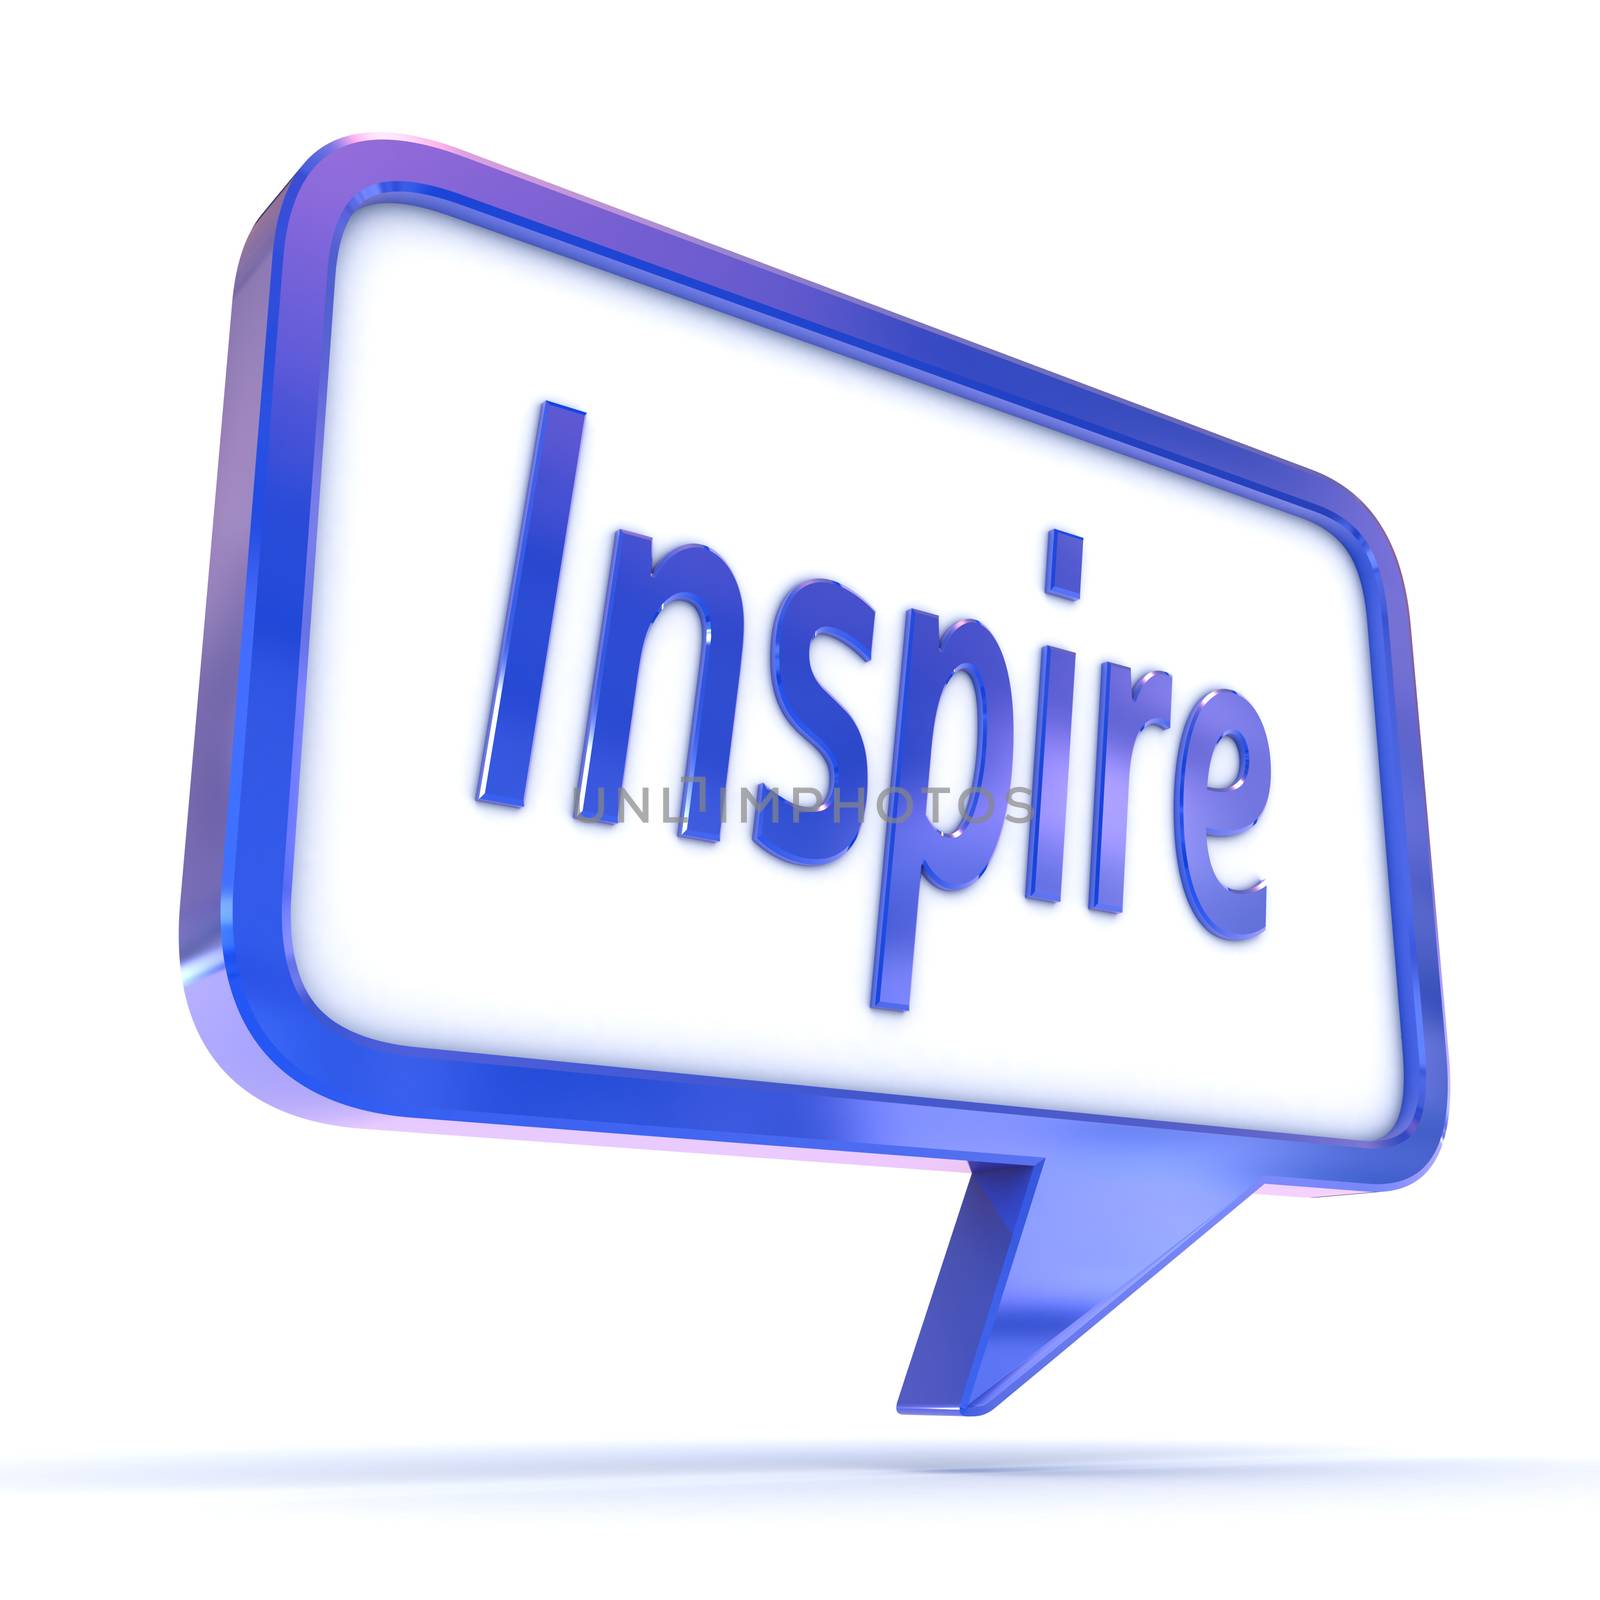 A Colourful 3d Rendered Concept Illustration showing "Inspire" writen in a Speech Bubble